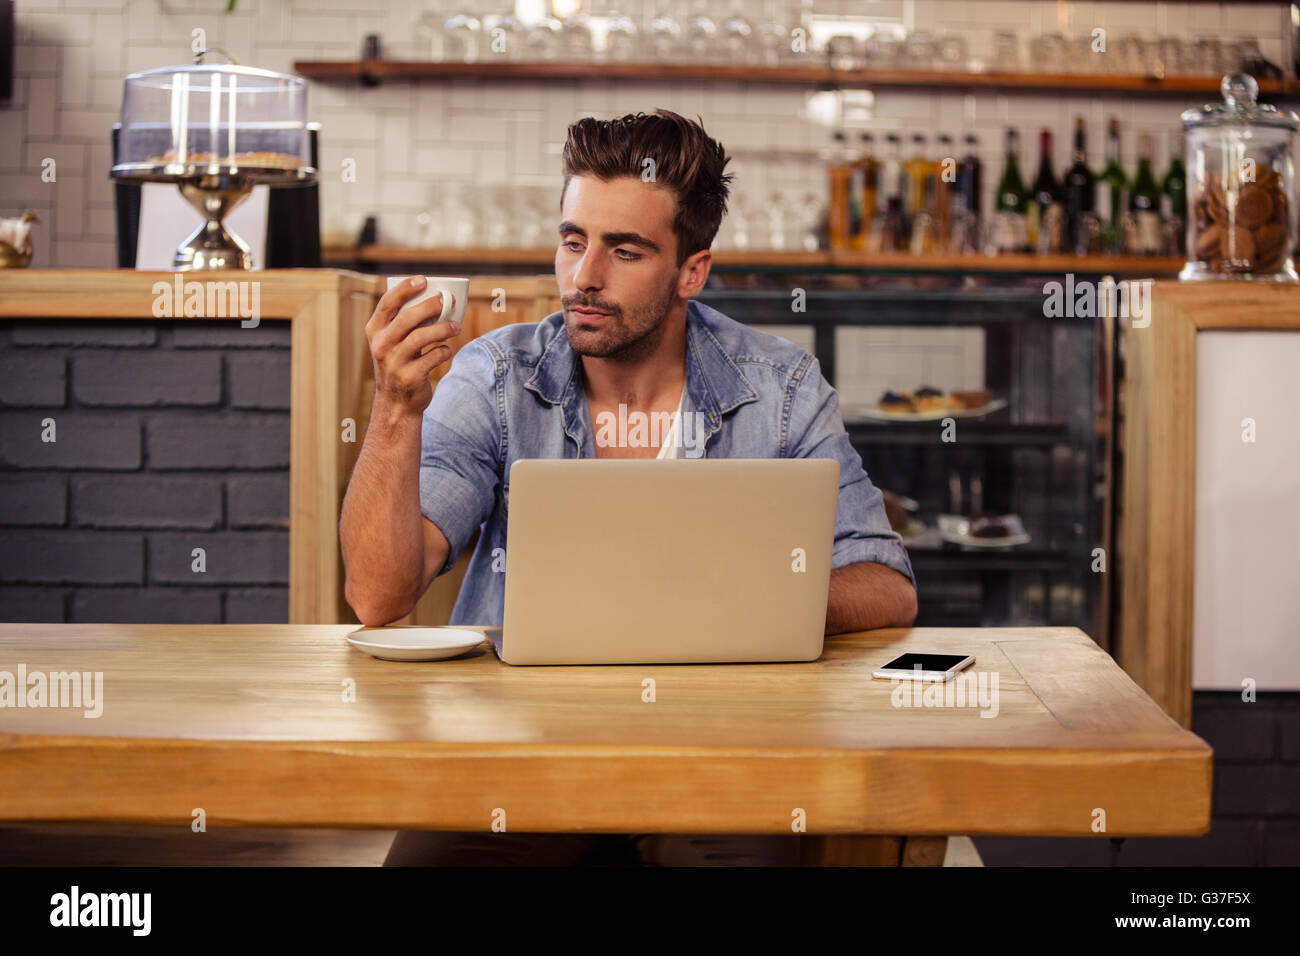 Portrait of hipster man sipping coffee Stock Photo